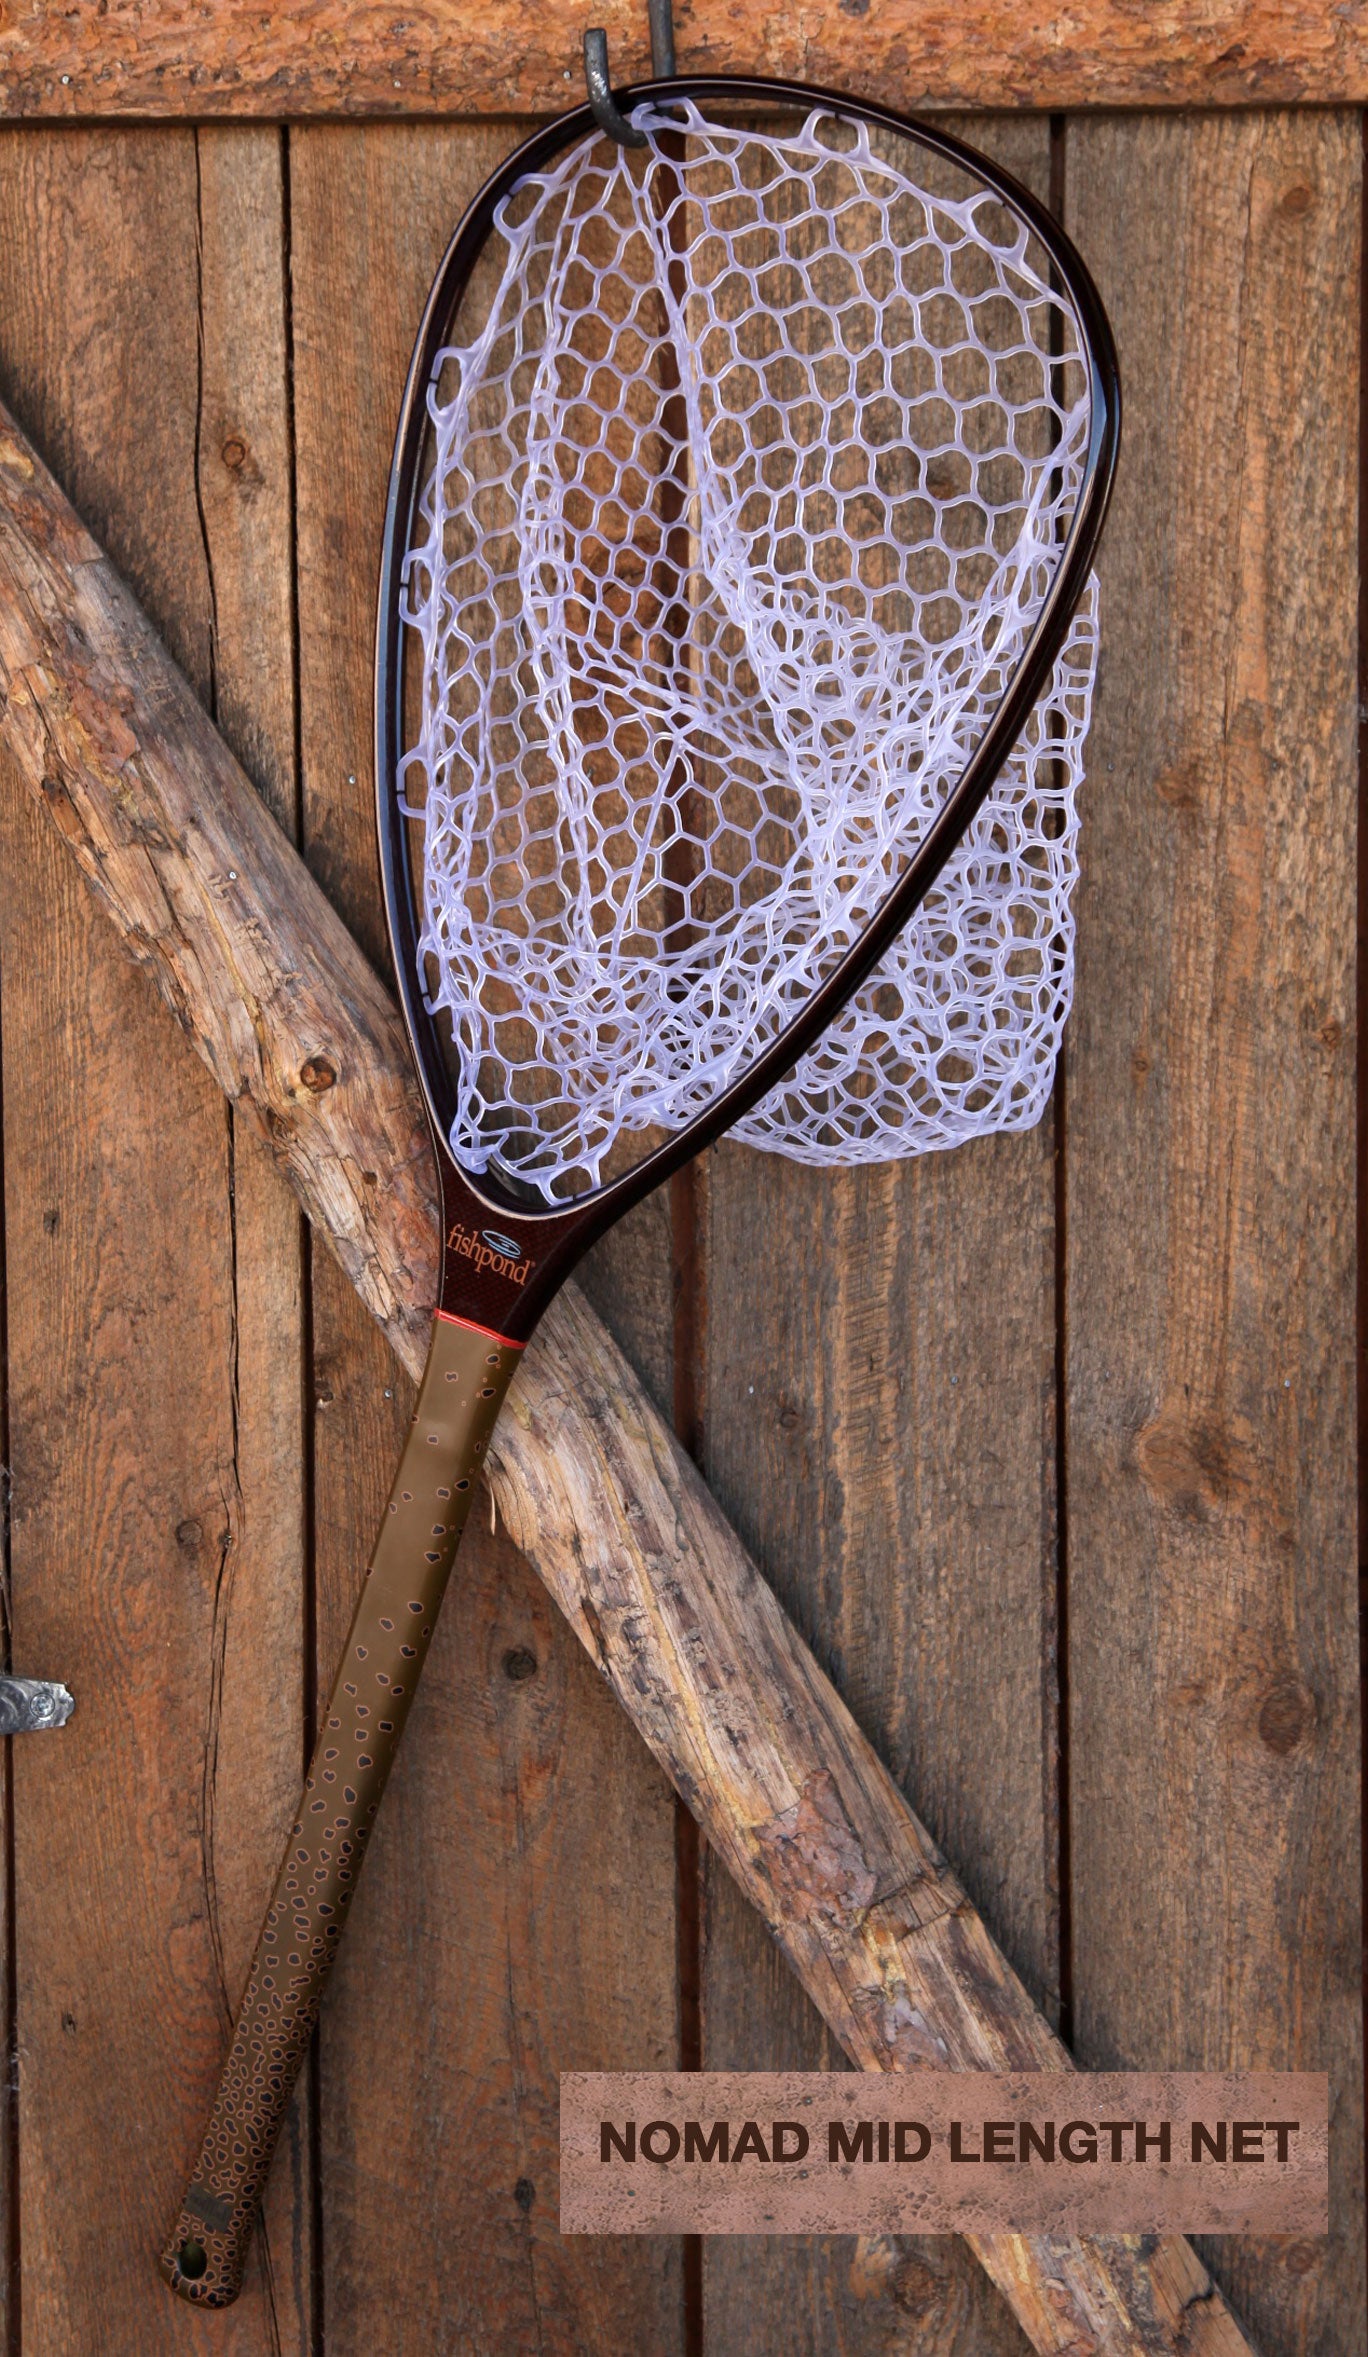 Fishpond Nomad Mid-Length Net Tailwater Image 03